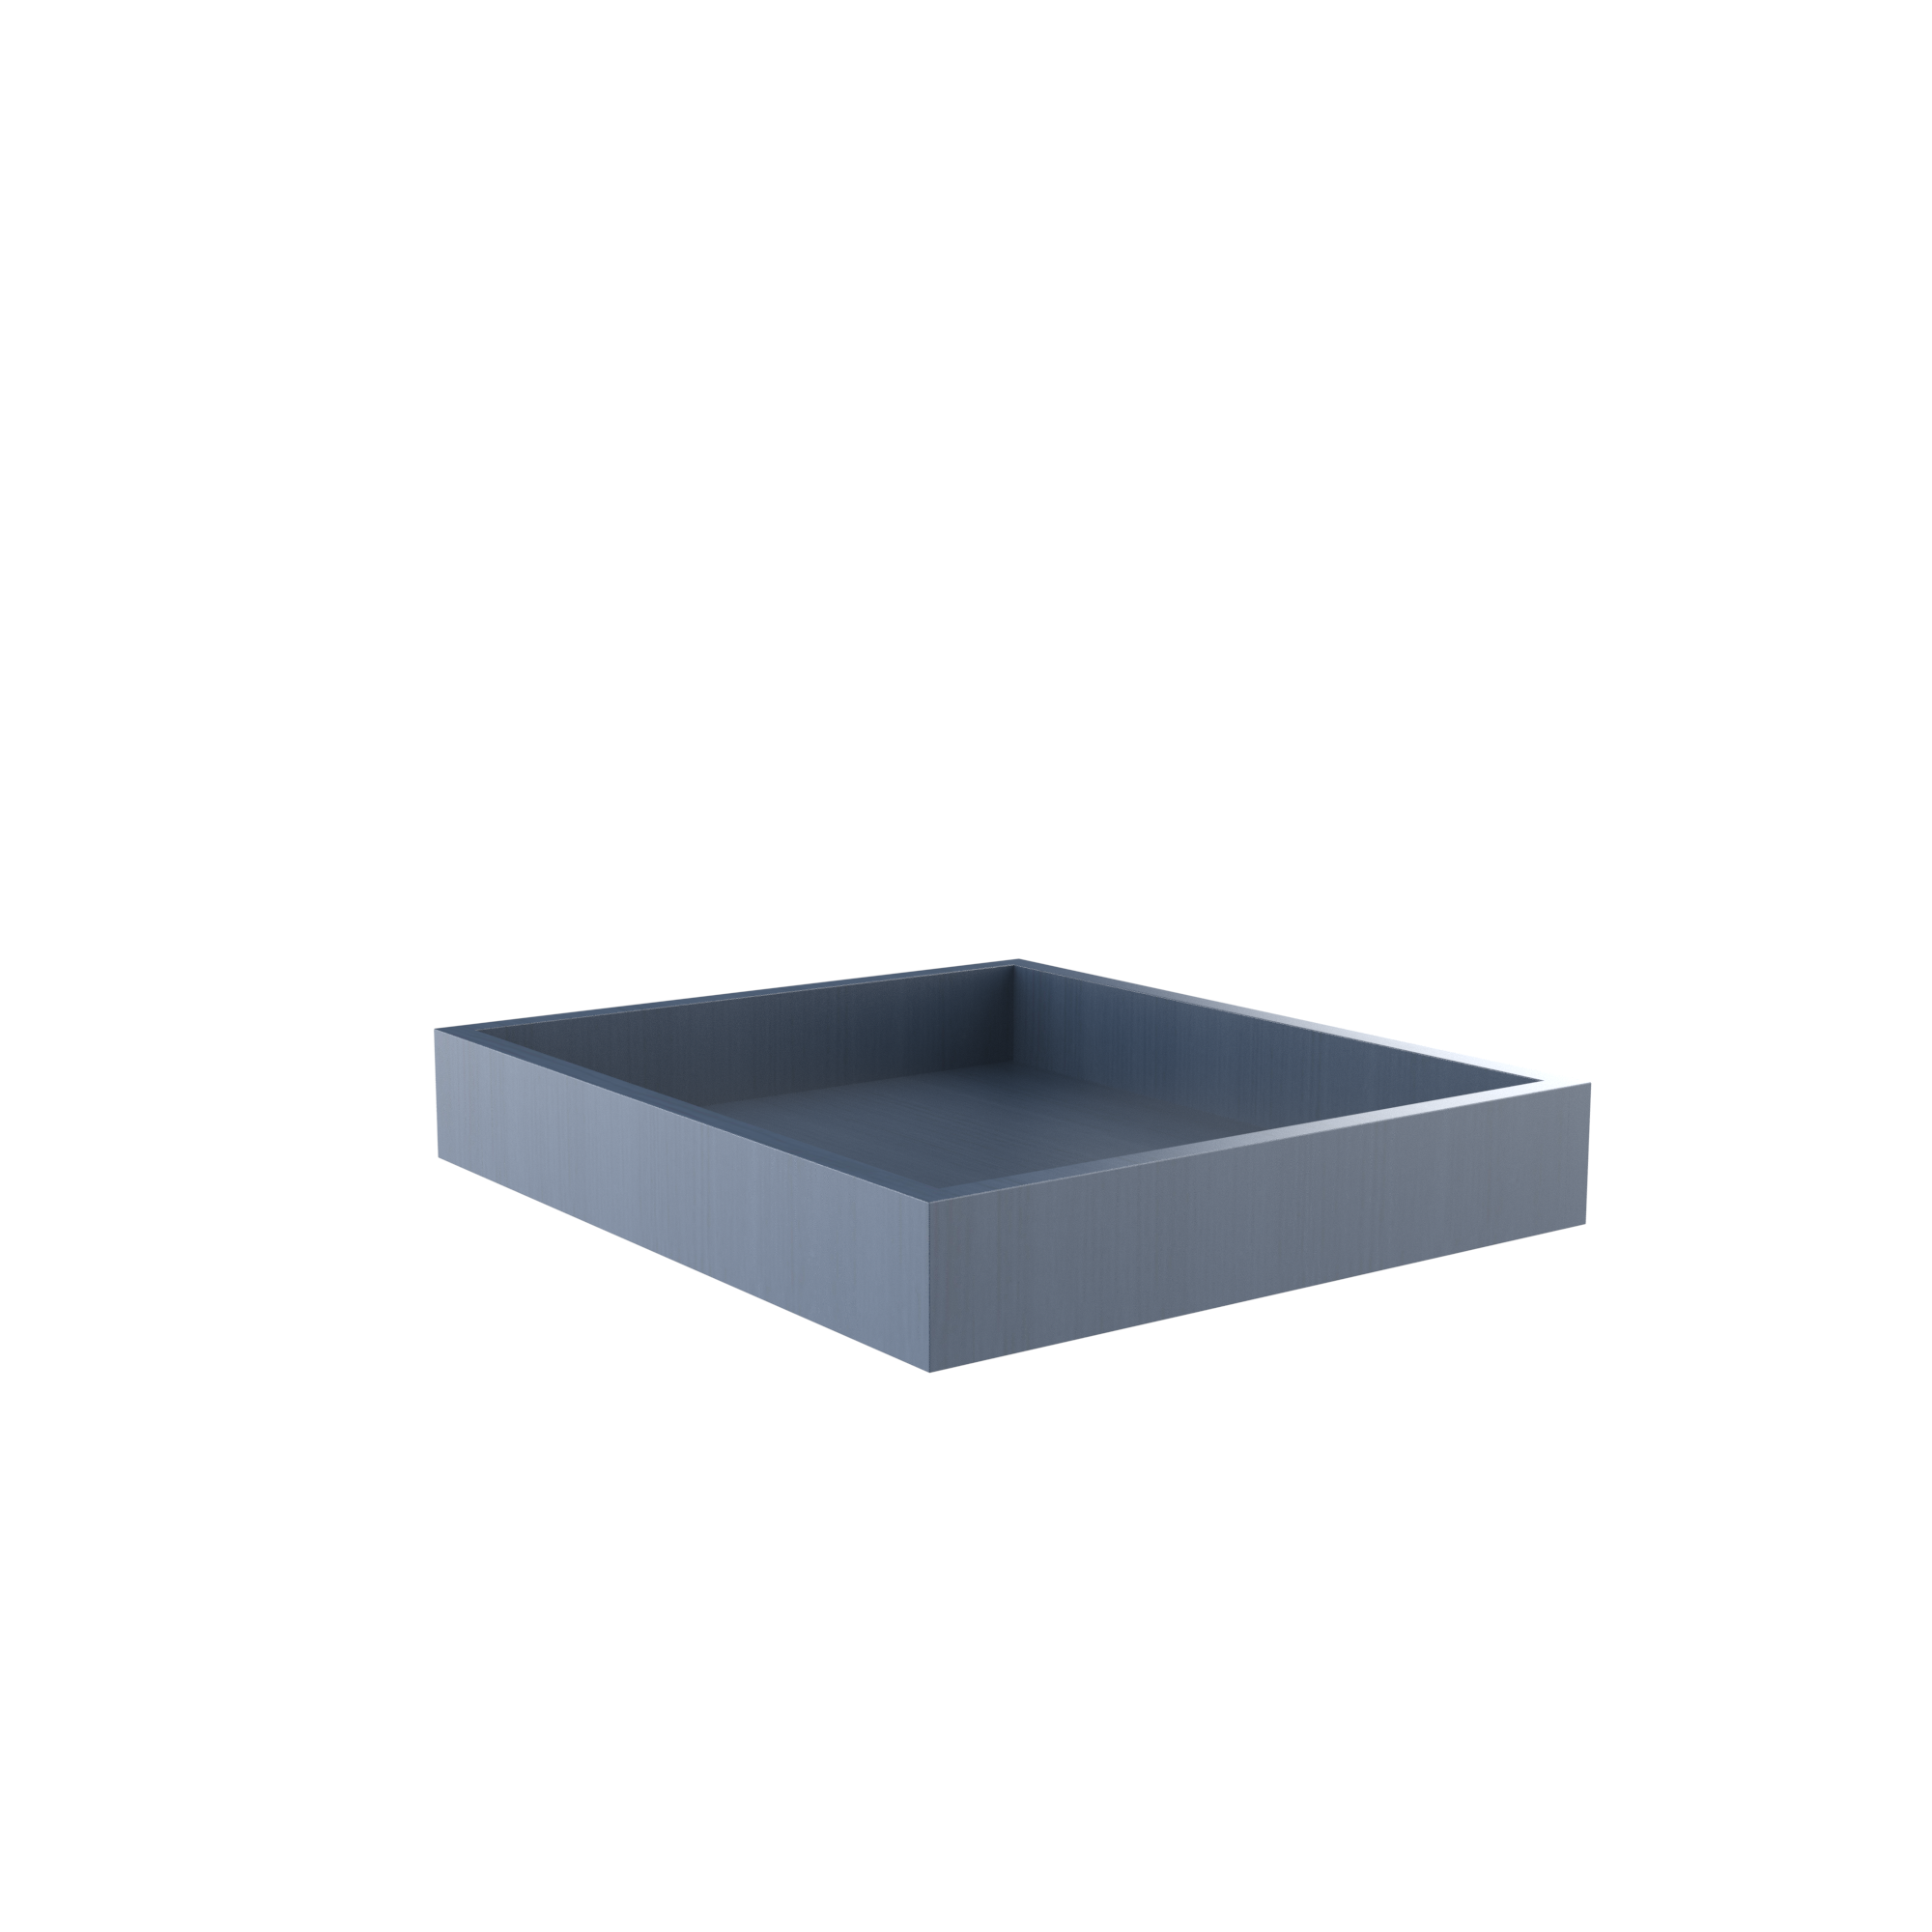 Roll Out Tray for Cabinets - Fits B18 - Blue Shaker Cabinet Cabinet